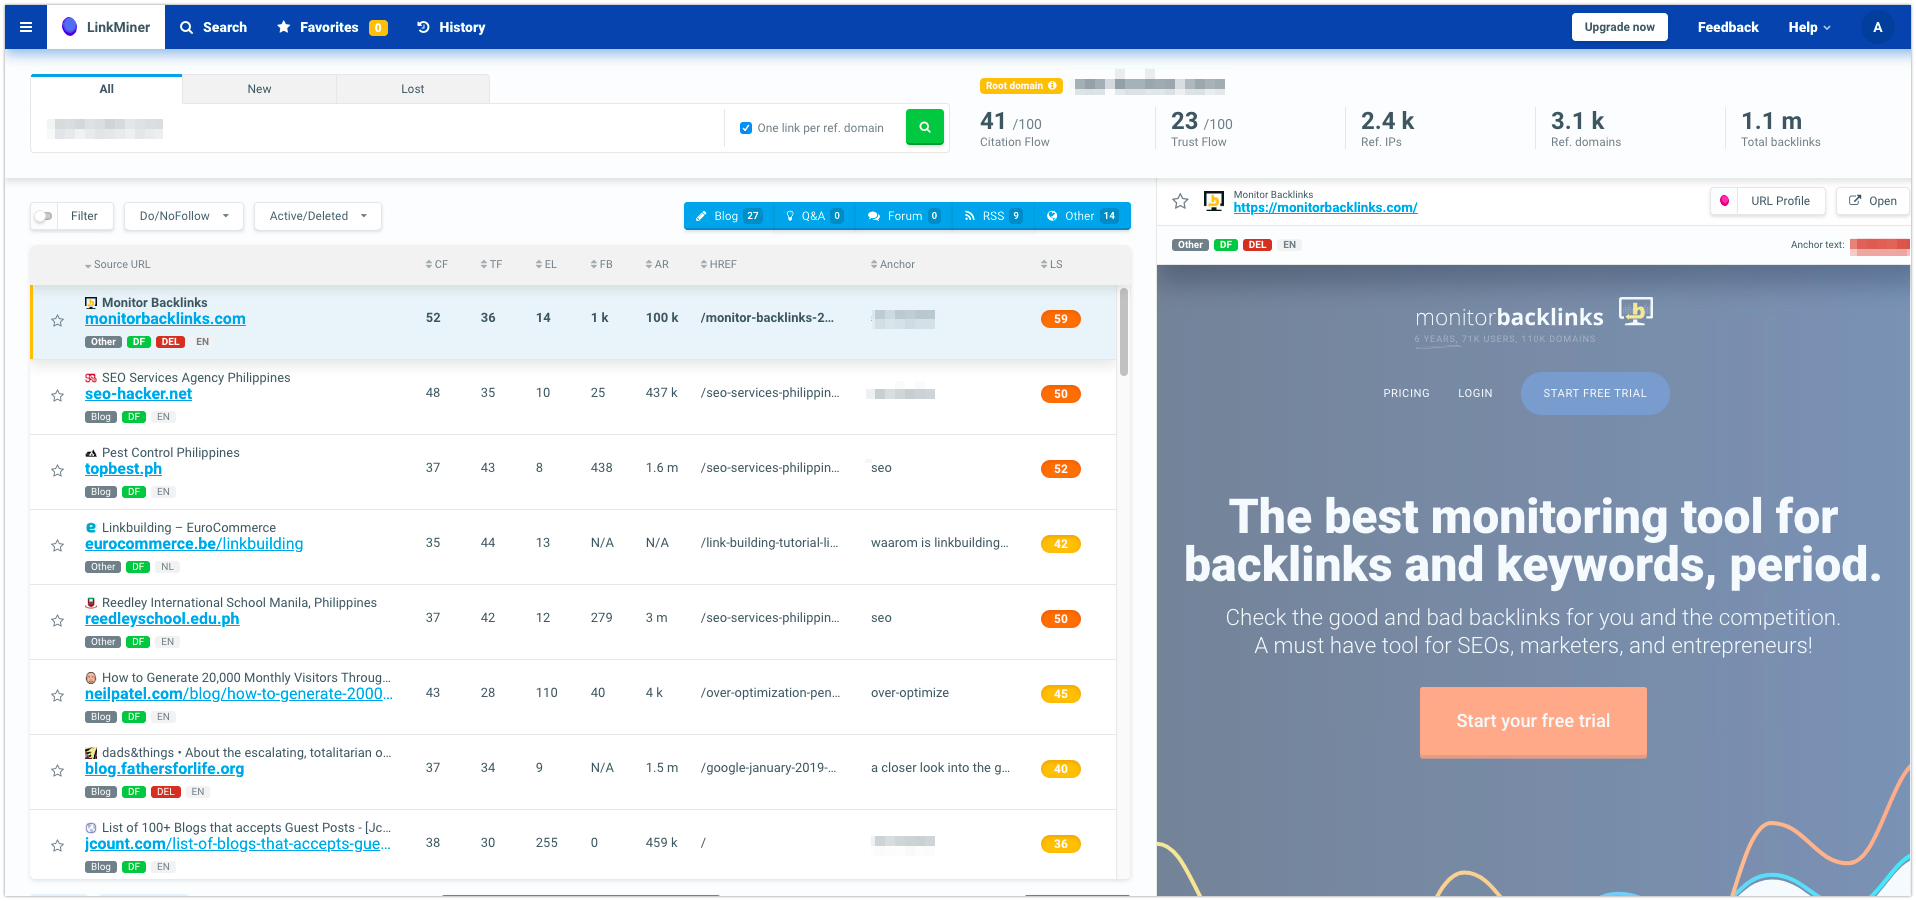 Listing of backlinking opportunities in LinkMiner